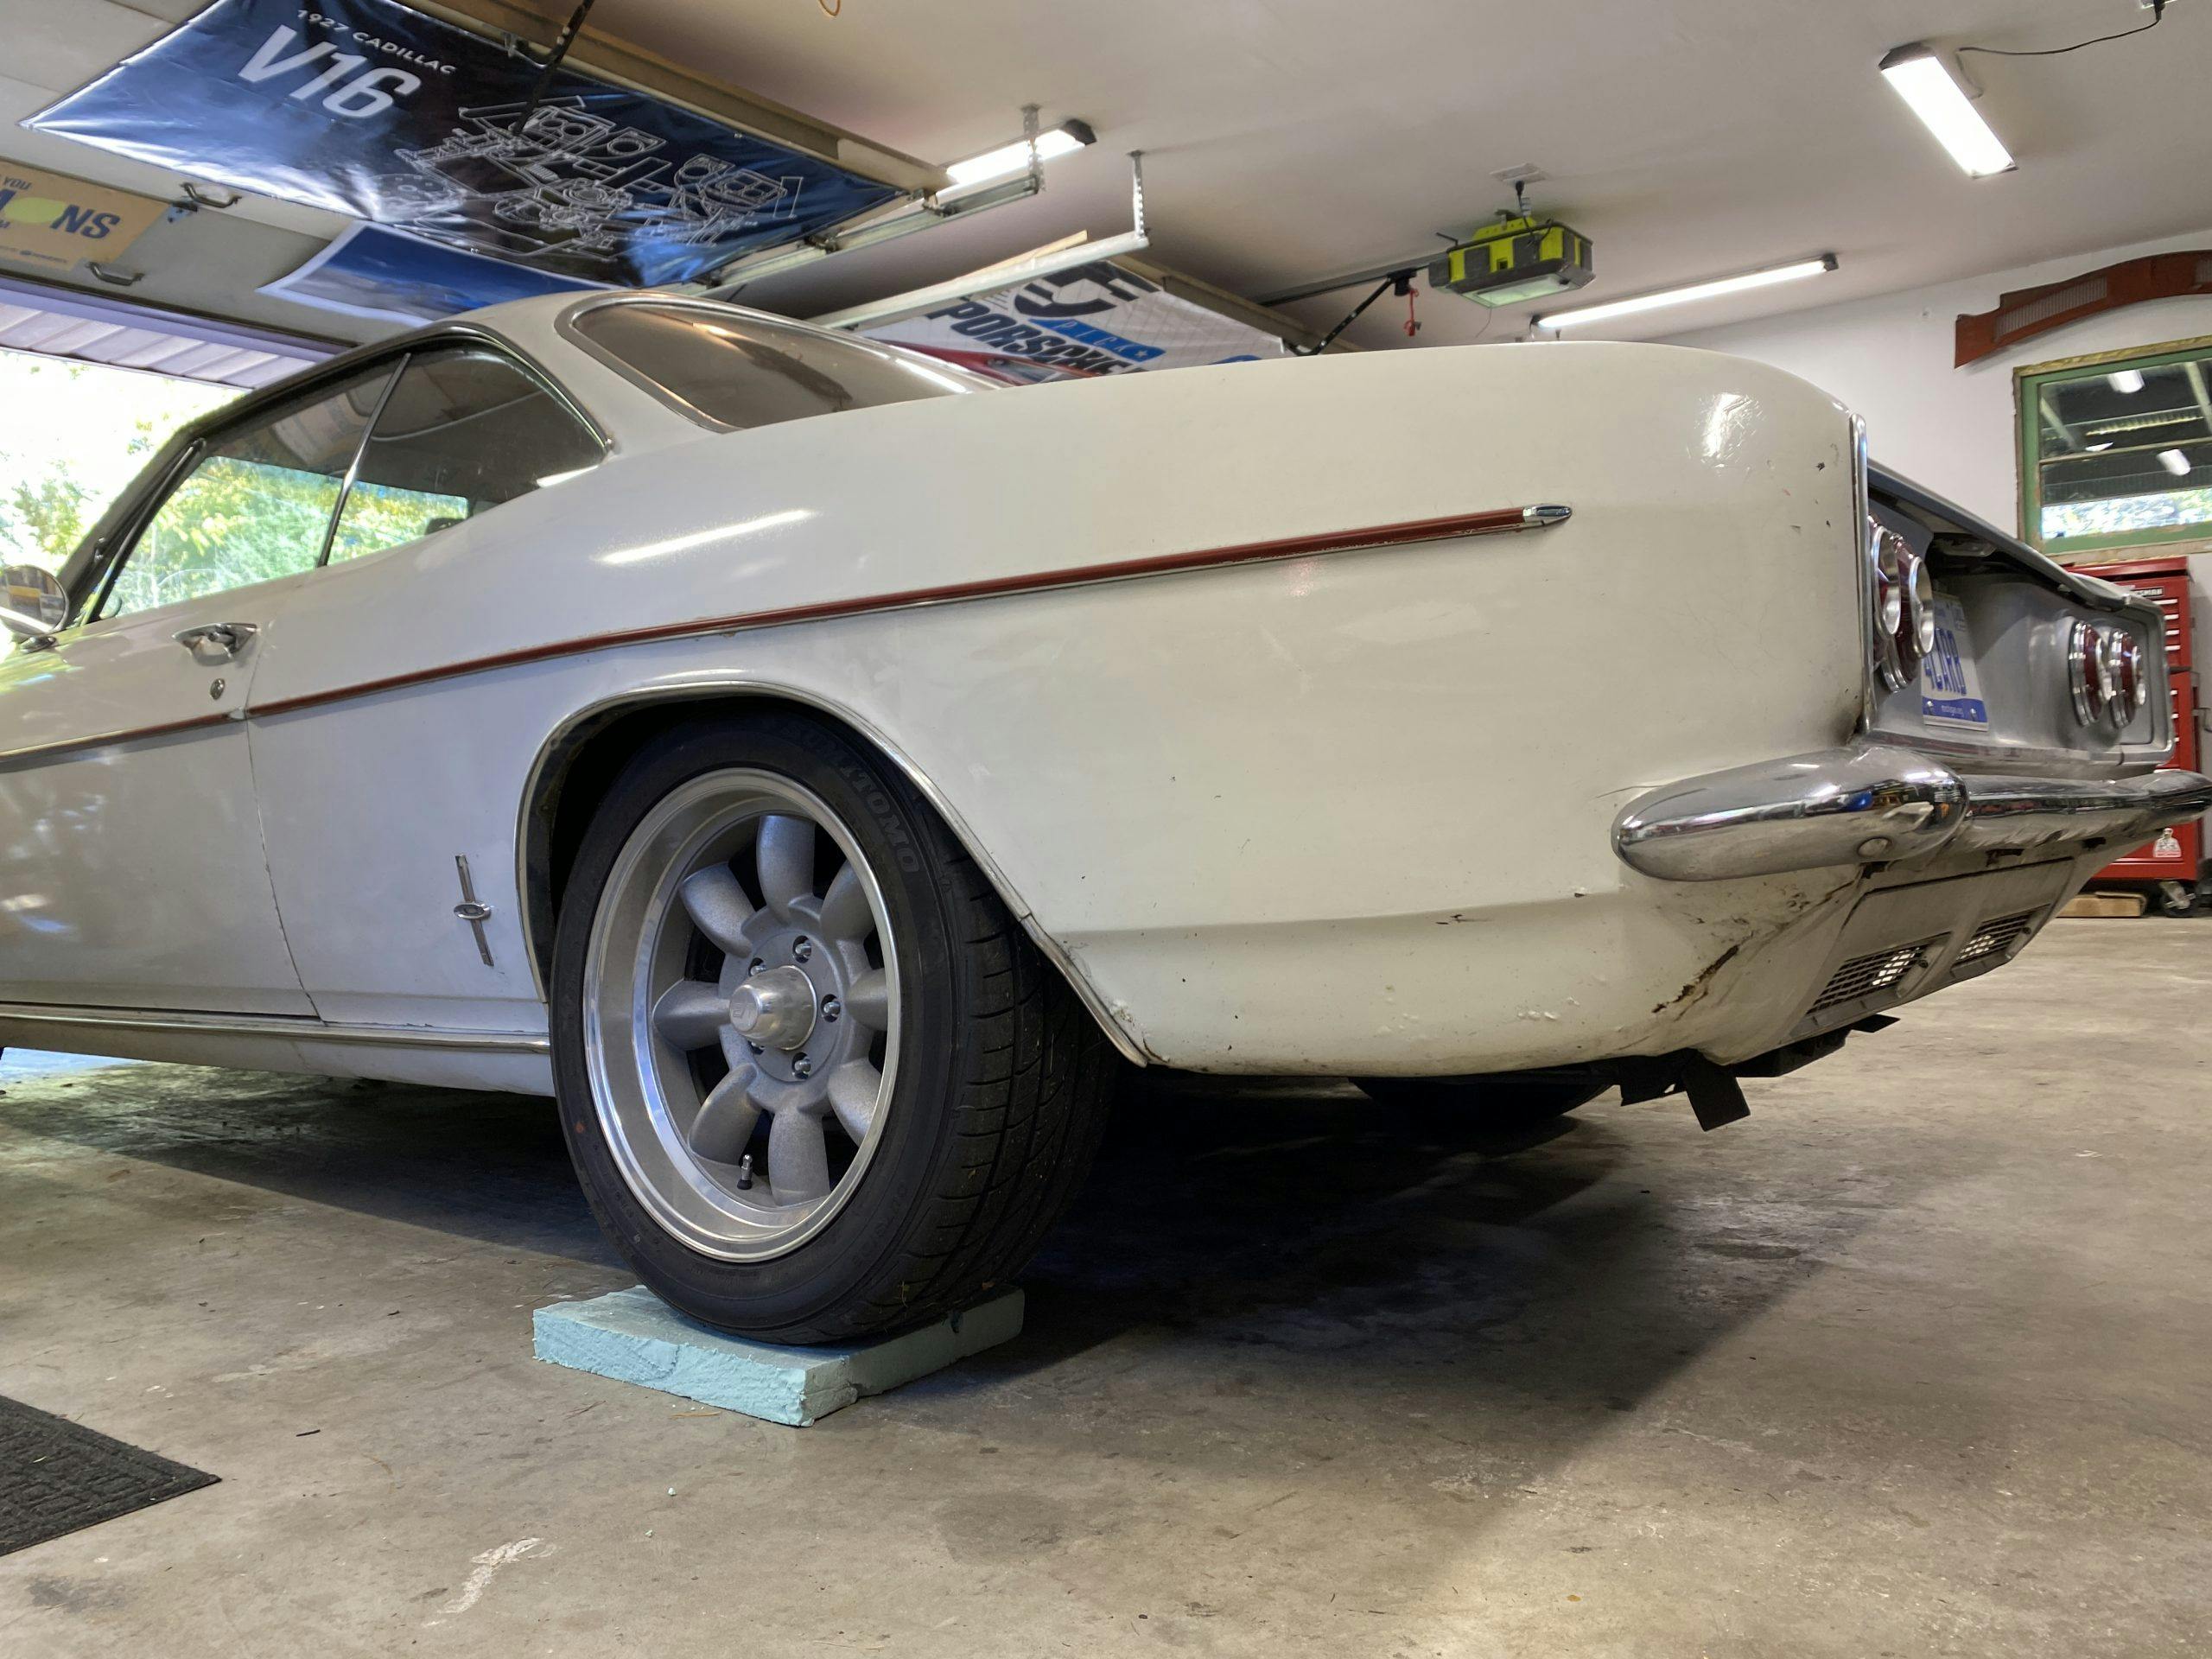 Chevrolet Corvair sitting on rigid foam to protect tires